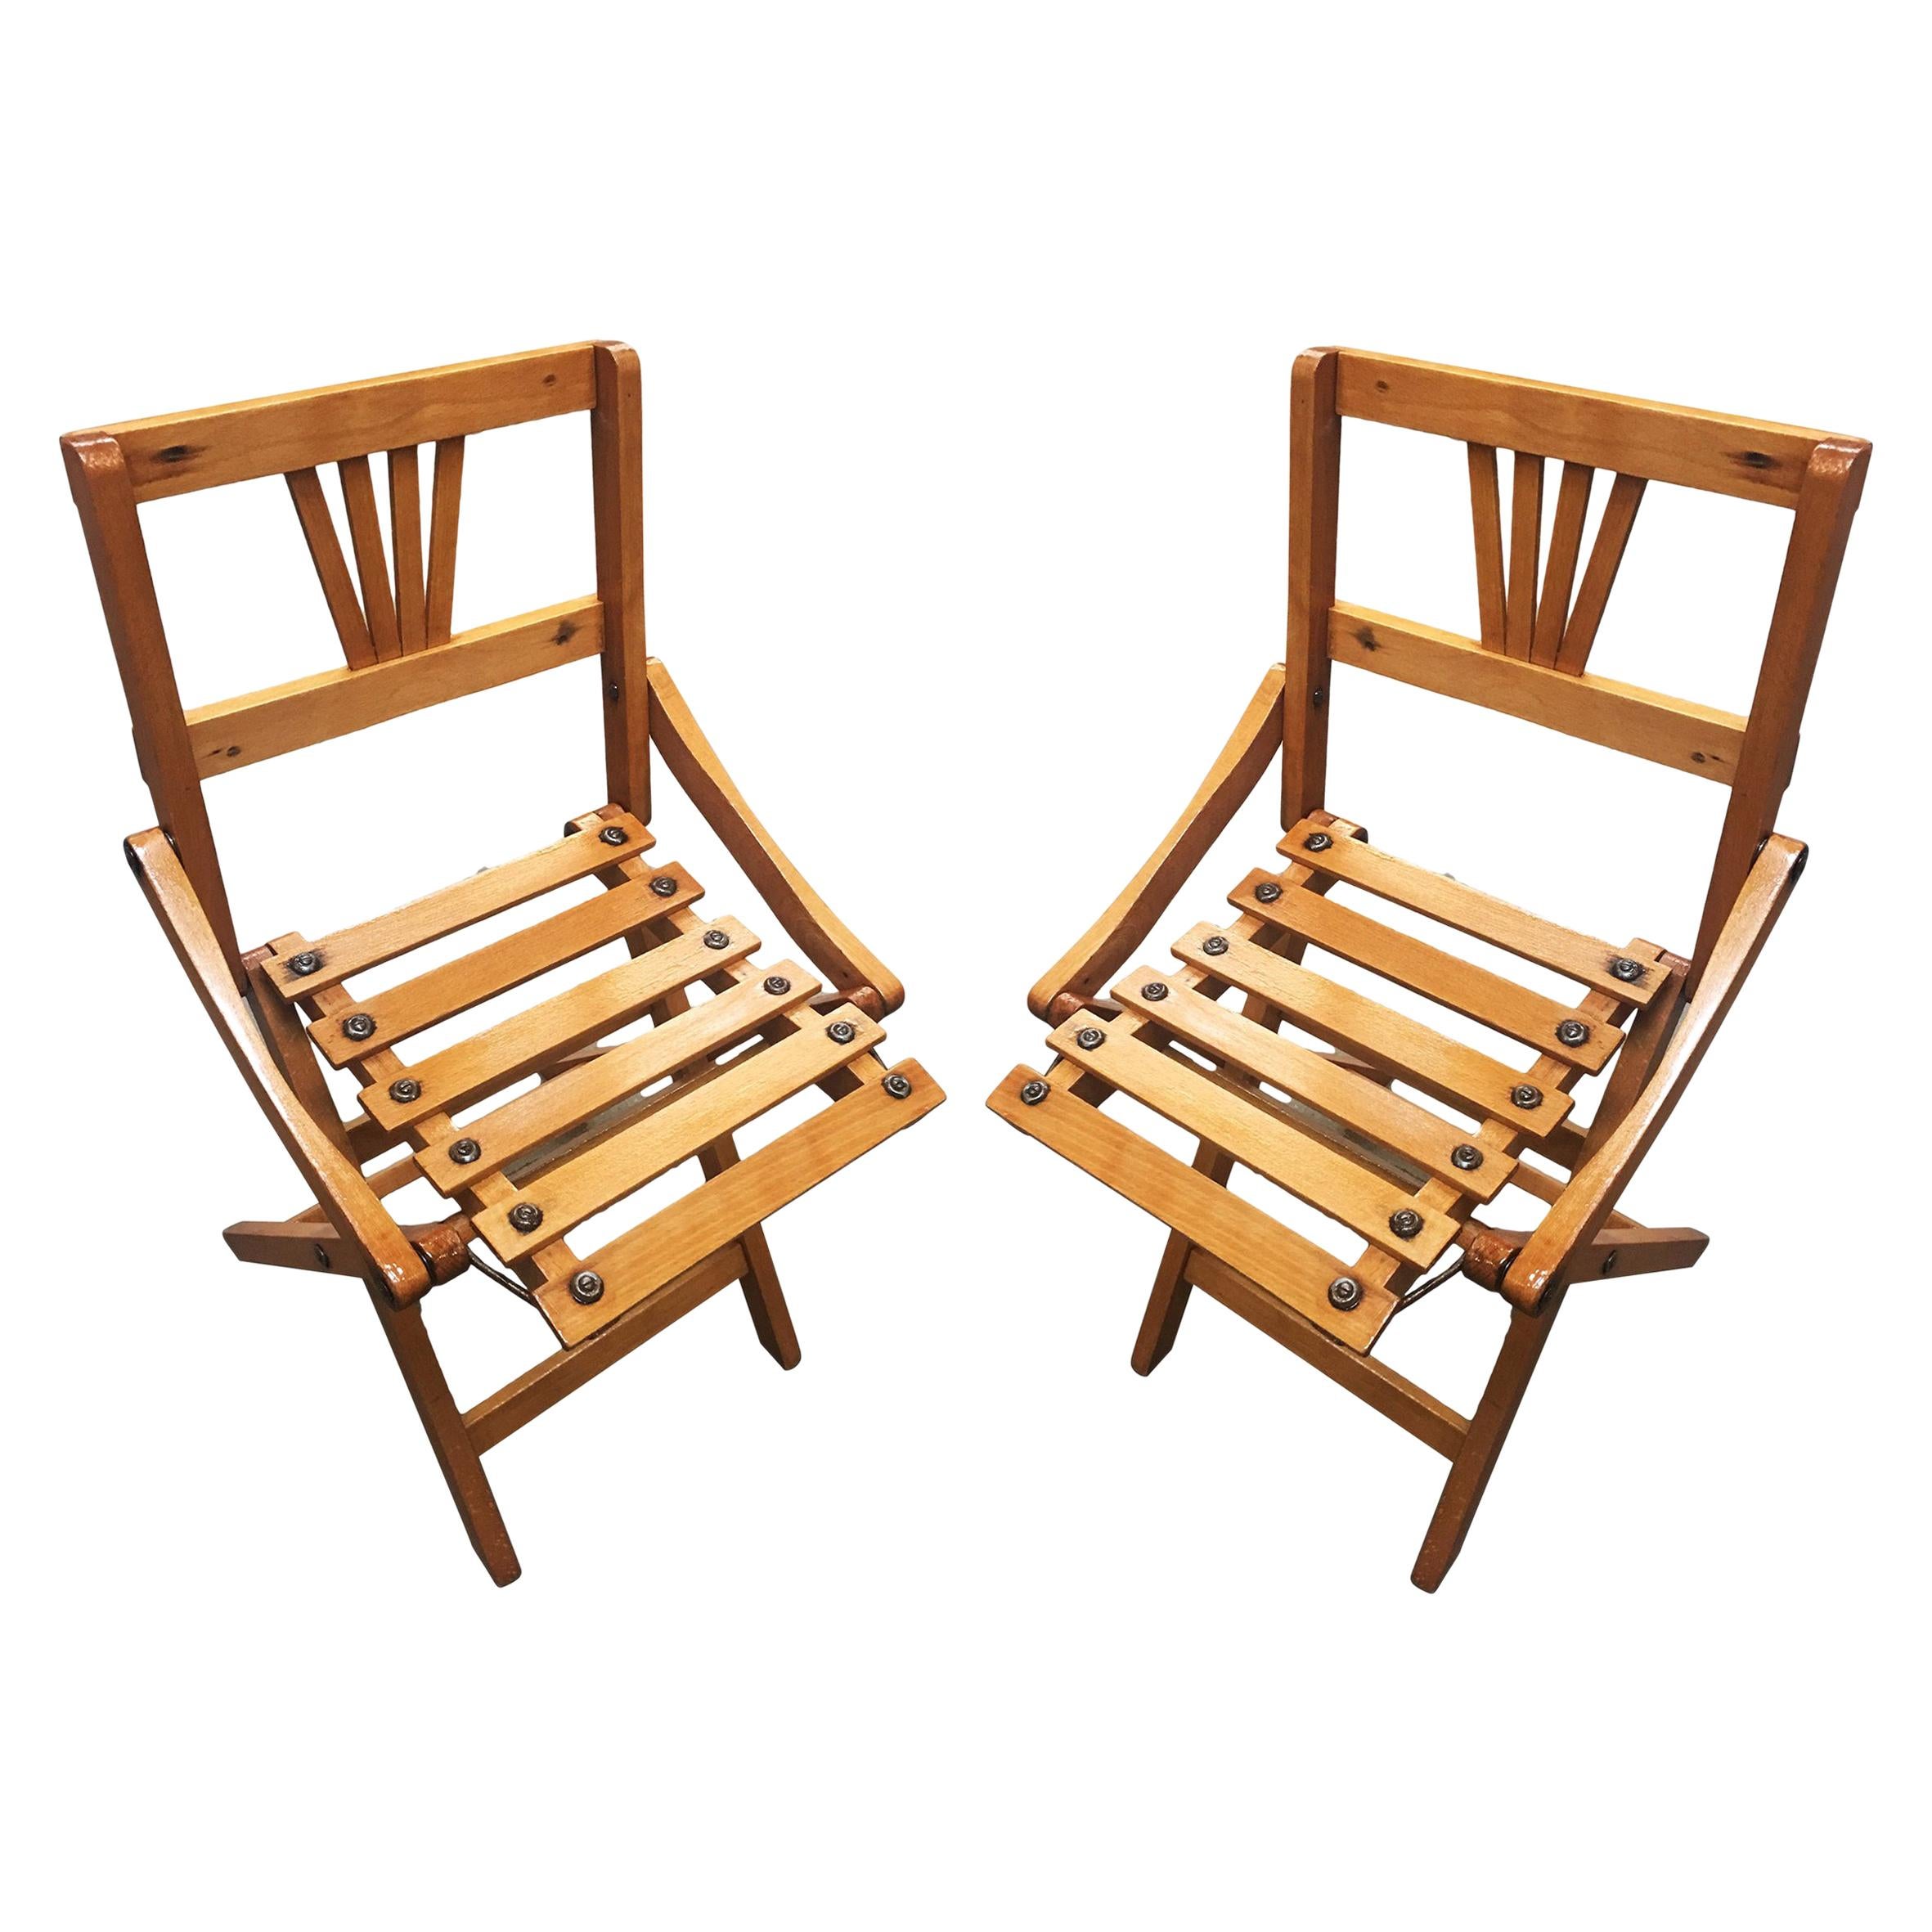 Pair of George Nelson Inspired Child-Size Slat Folding Chair